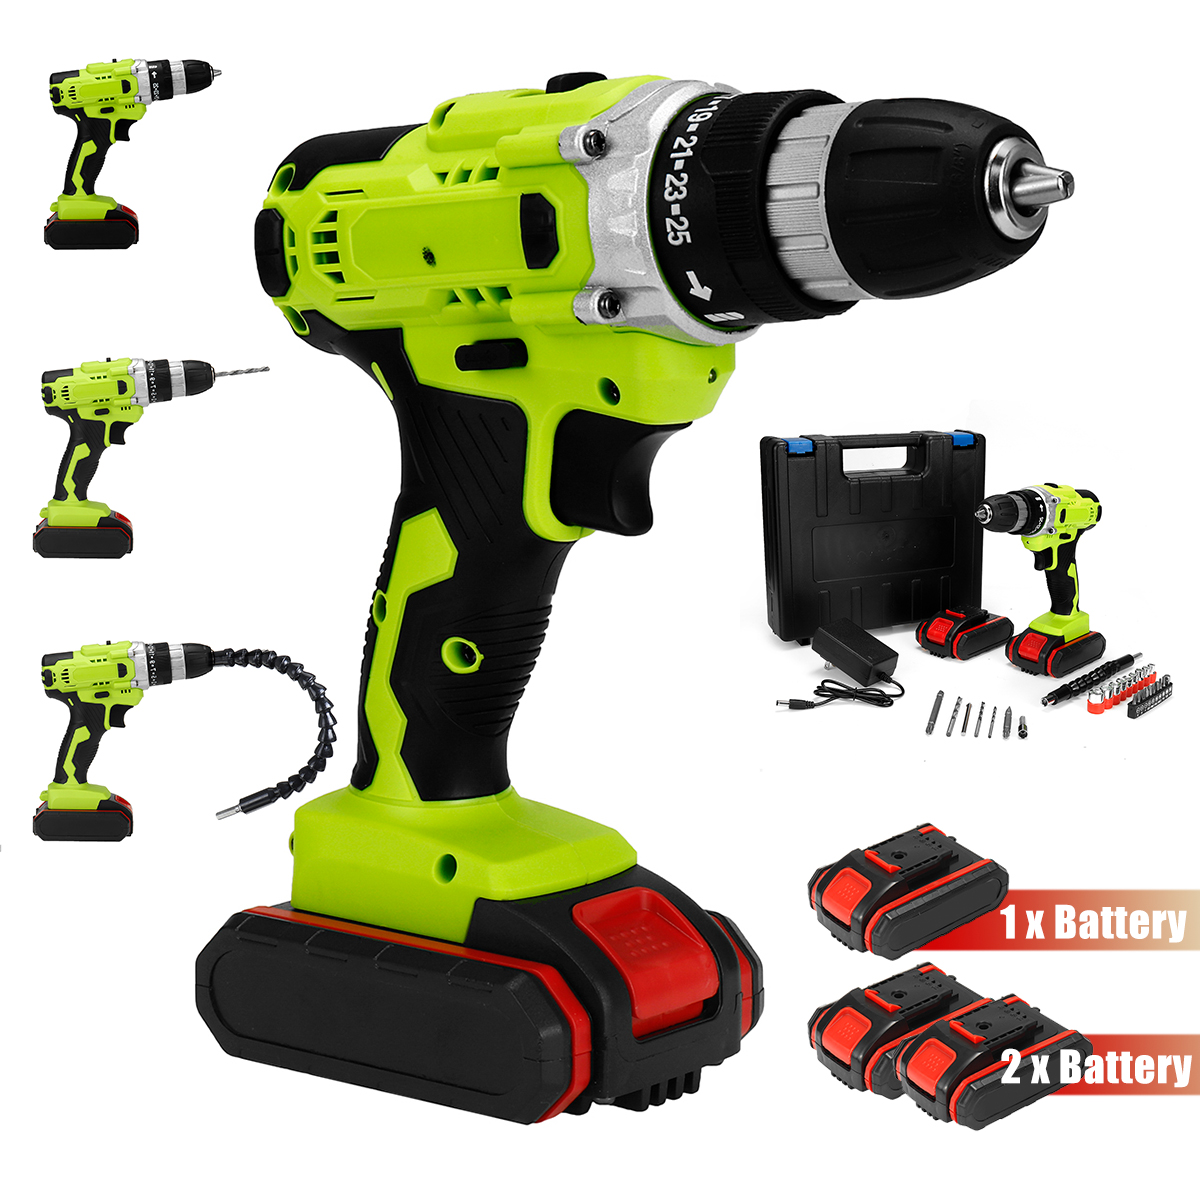 3-in-1-Multifunctional-Cordless-Electric-Drill-48VF-253-38-Inch-Chuck-Impact-Drill-W-12pcs-Battery-1839461-3